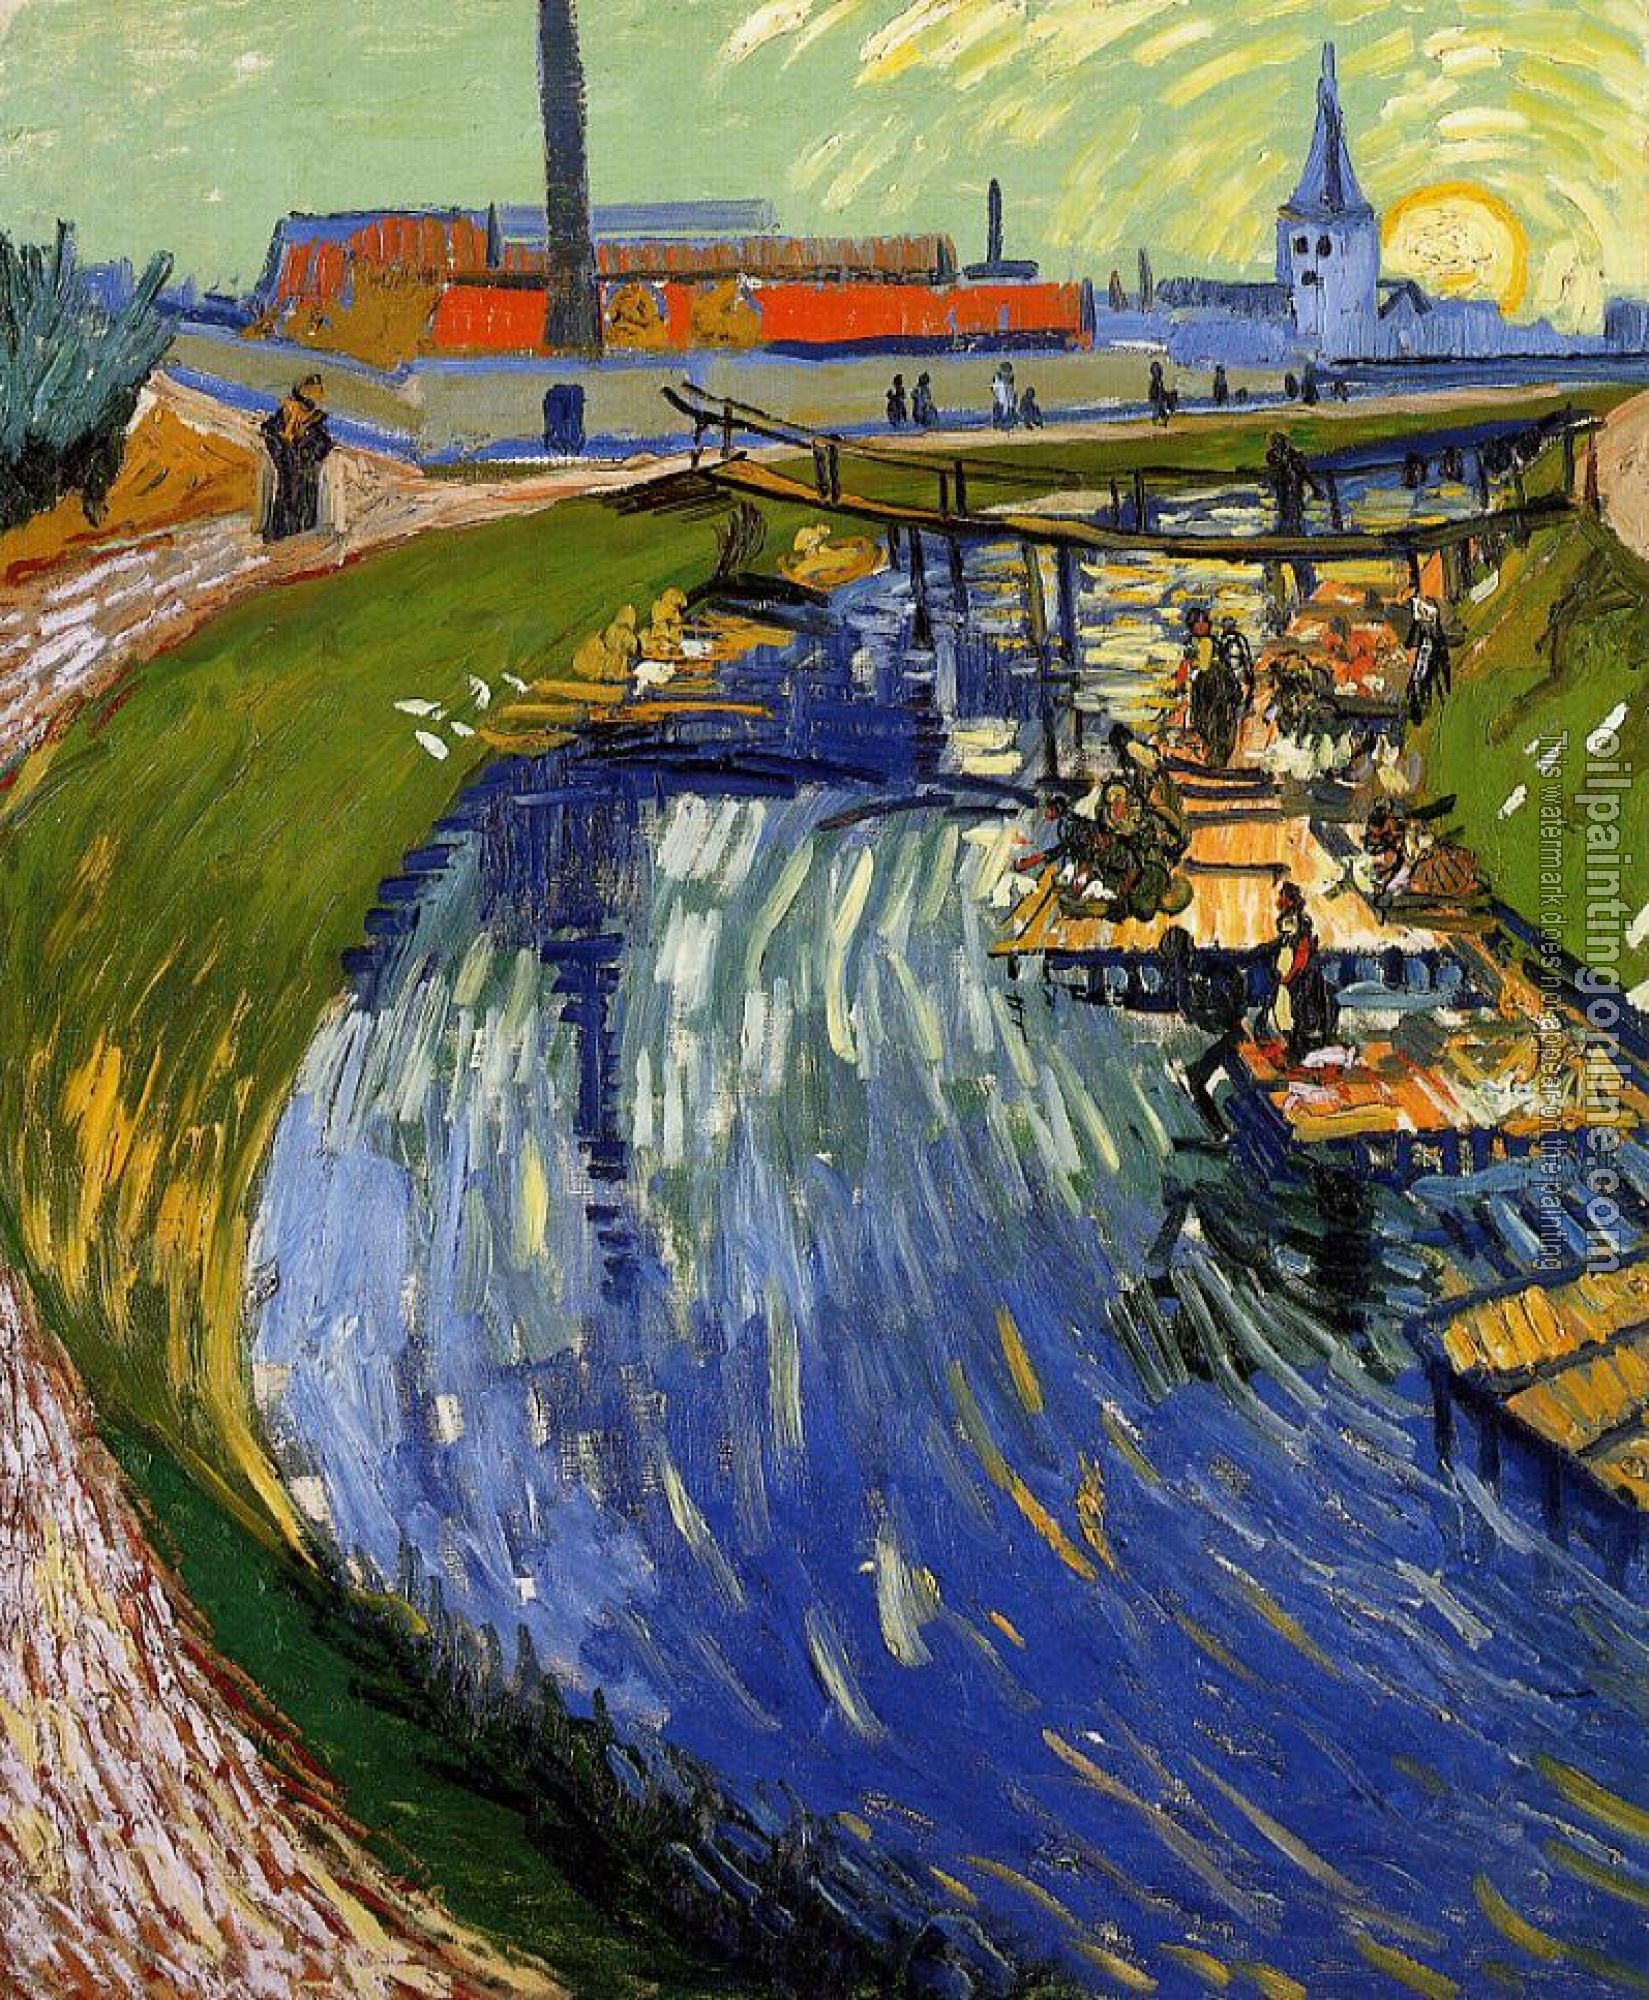 Gogh, Vincent van - Women Washing on a Canal